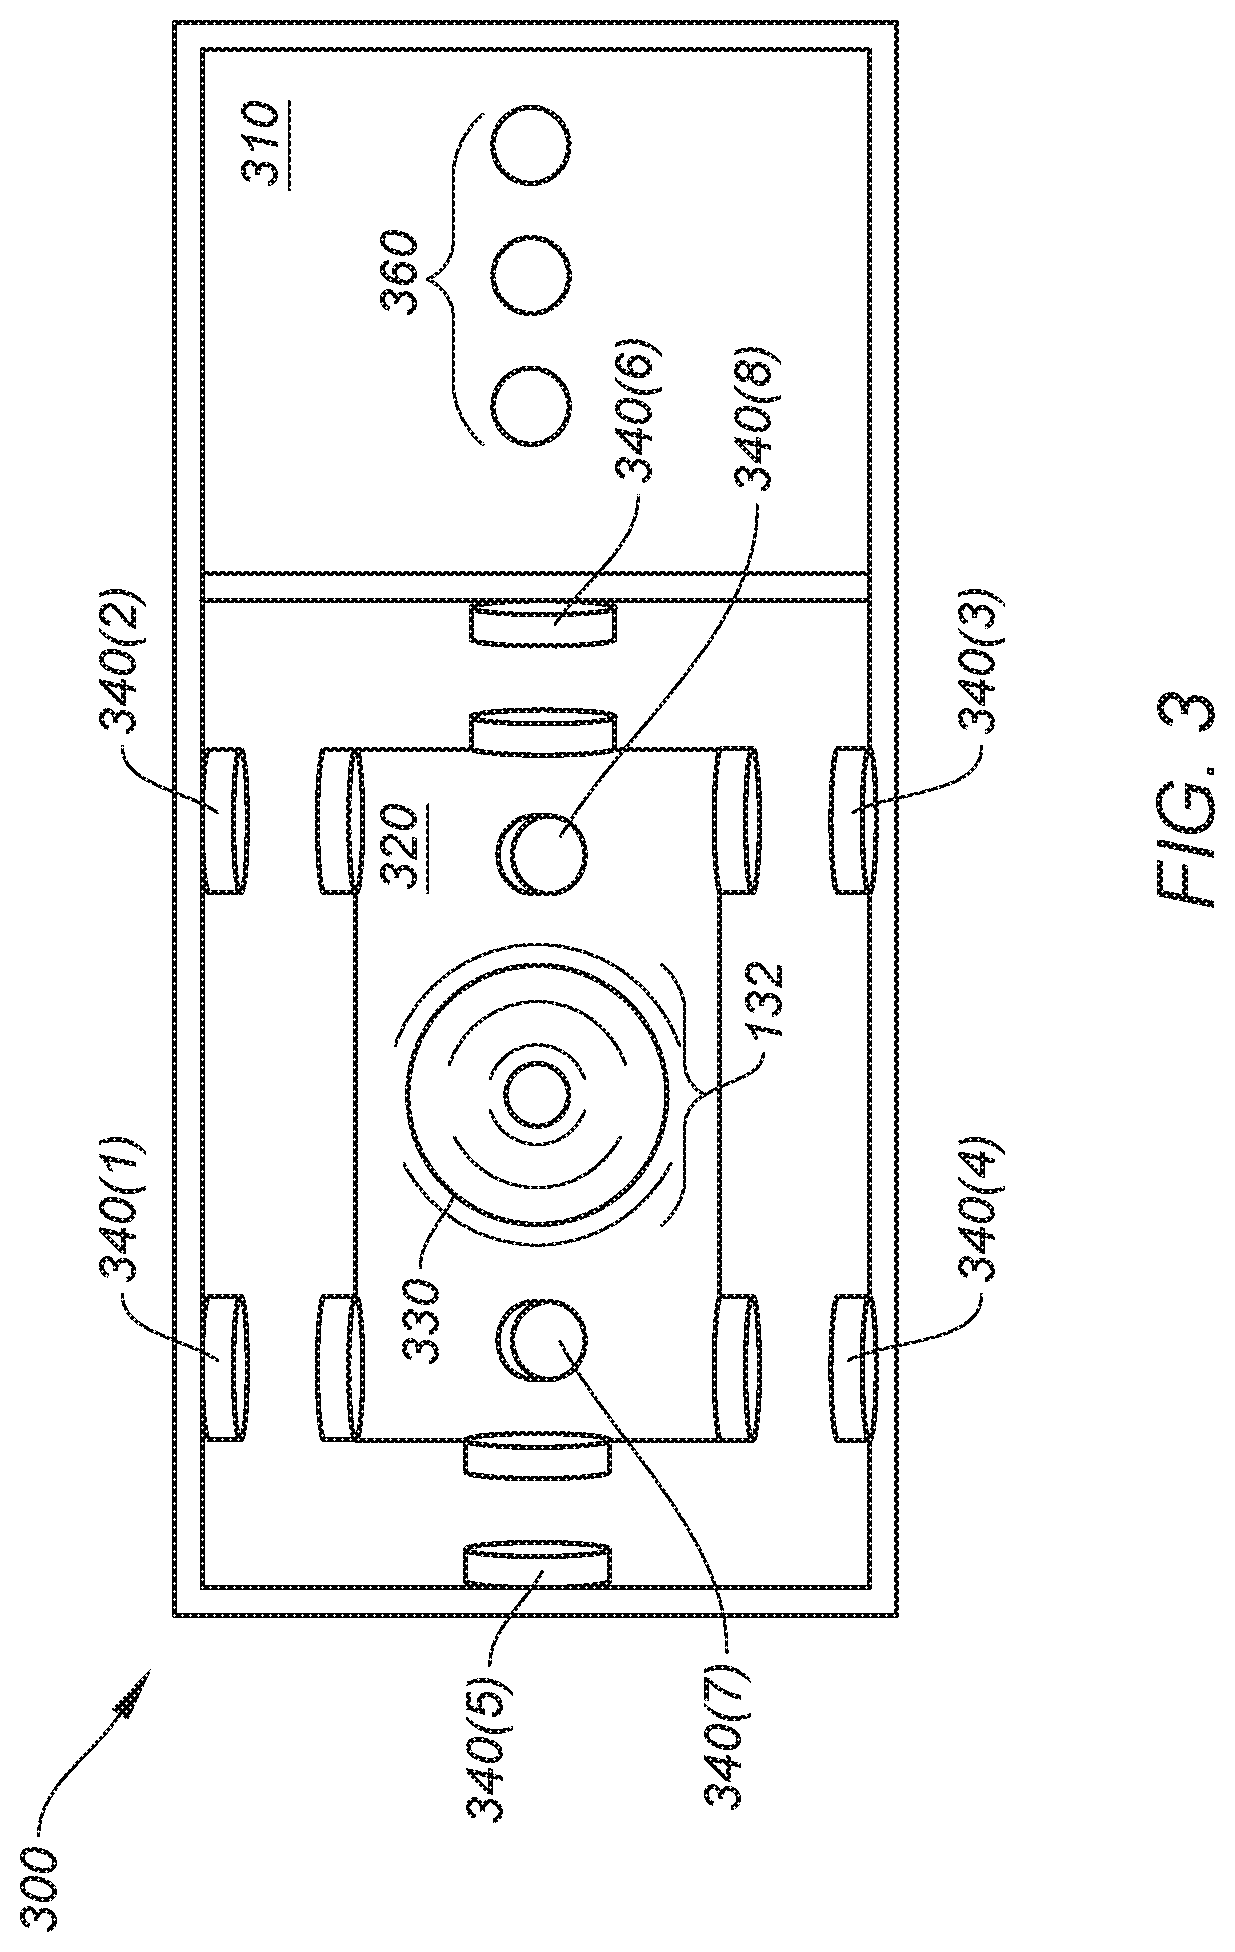 Suspended speaker housing in a teleconference system